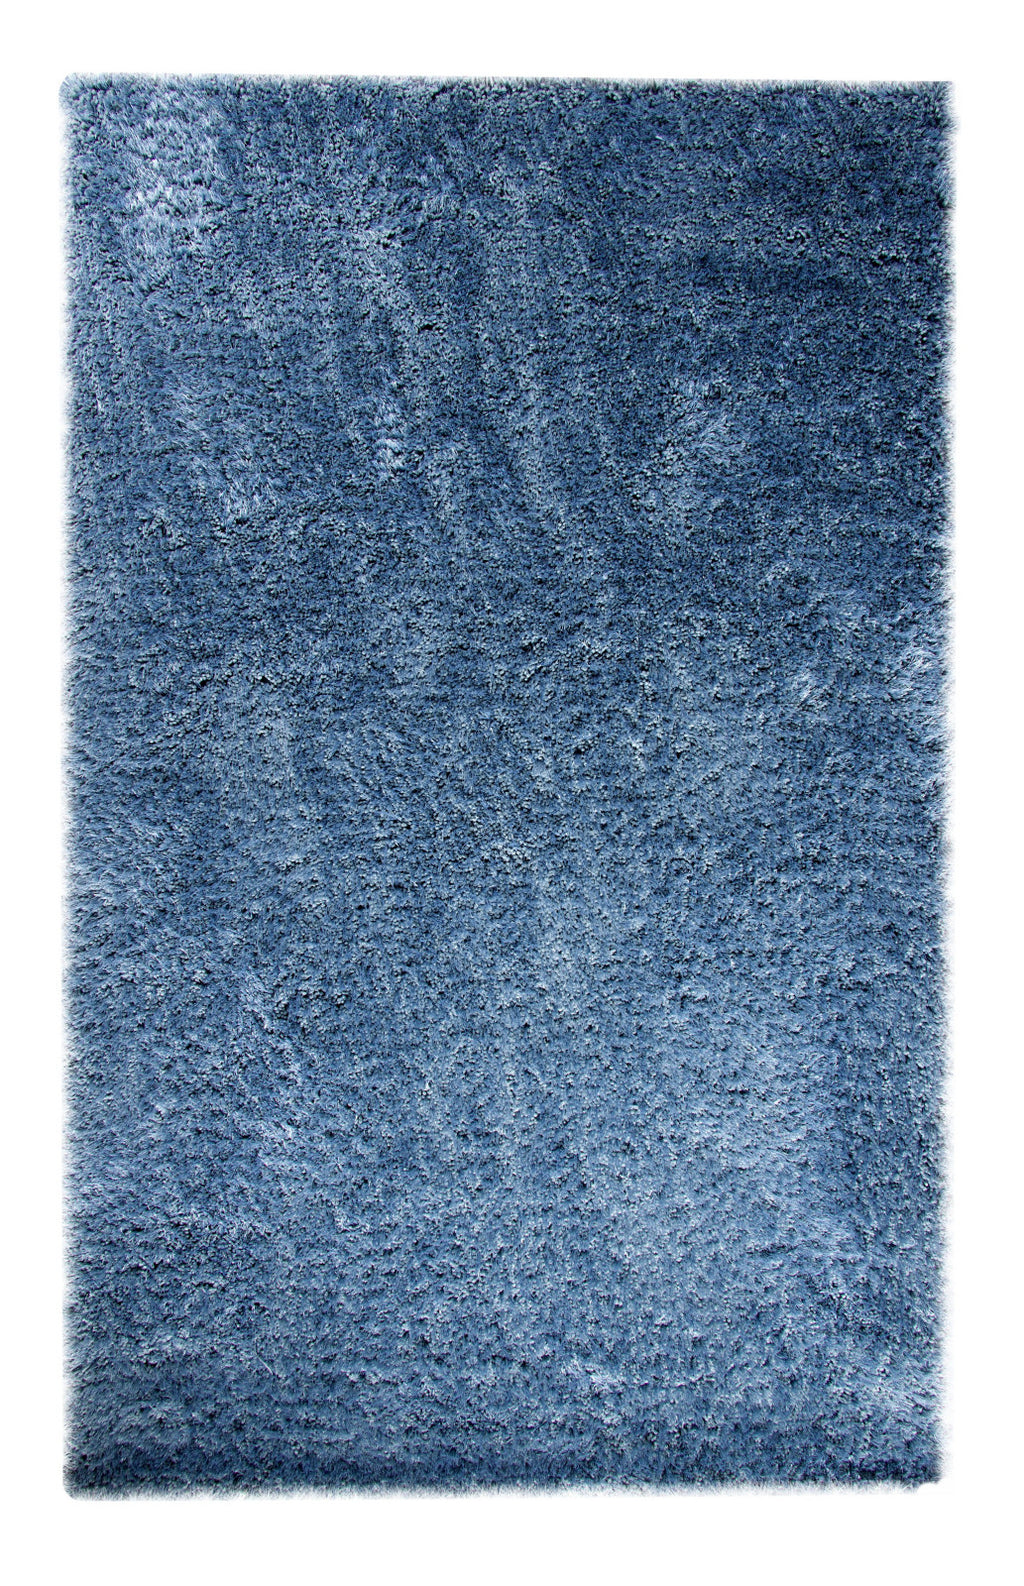 Dynamic Rugs Forte 88601 Teal Area Rug main image